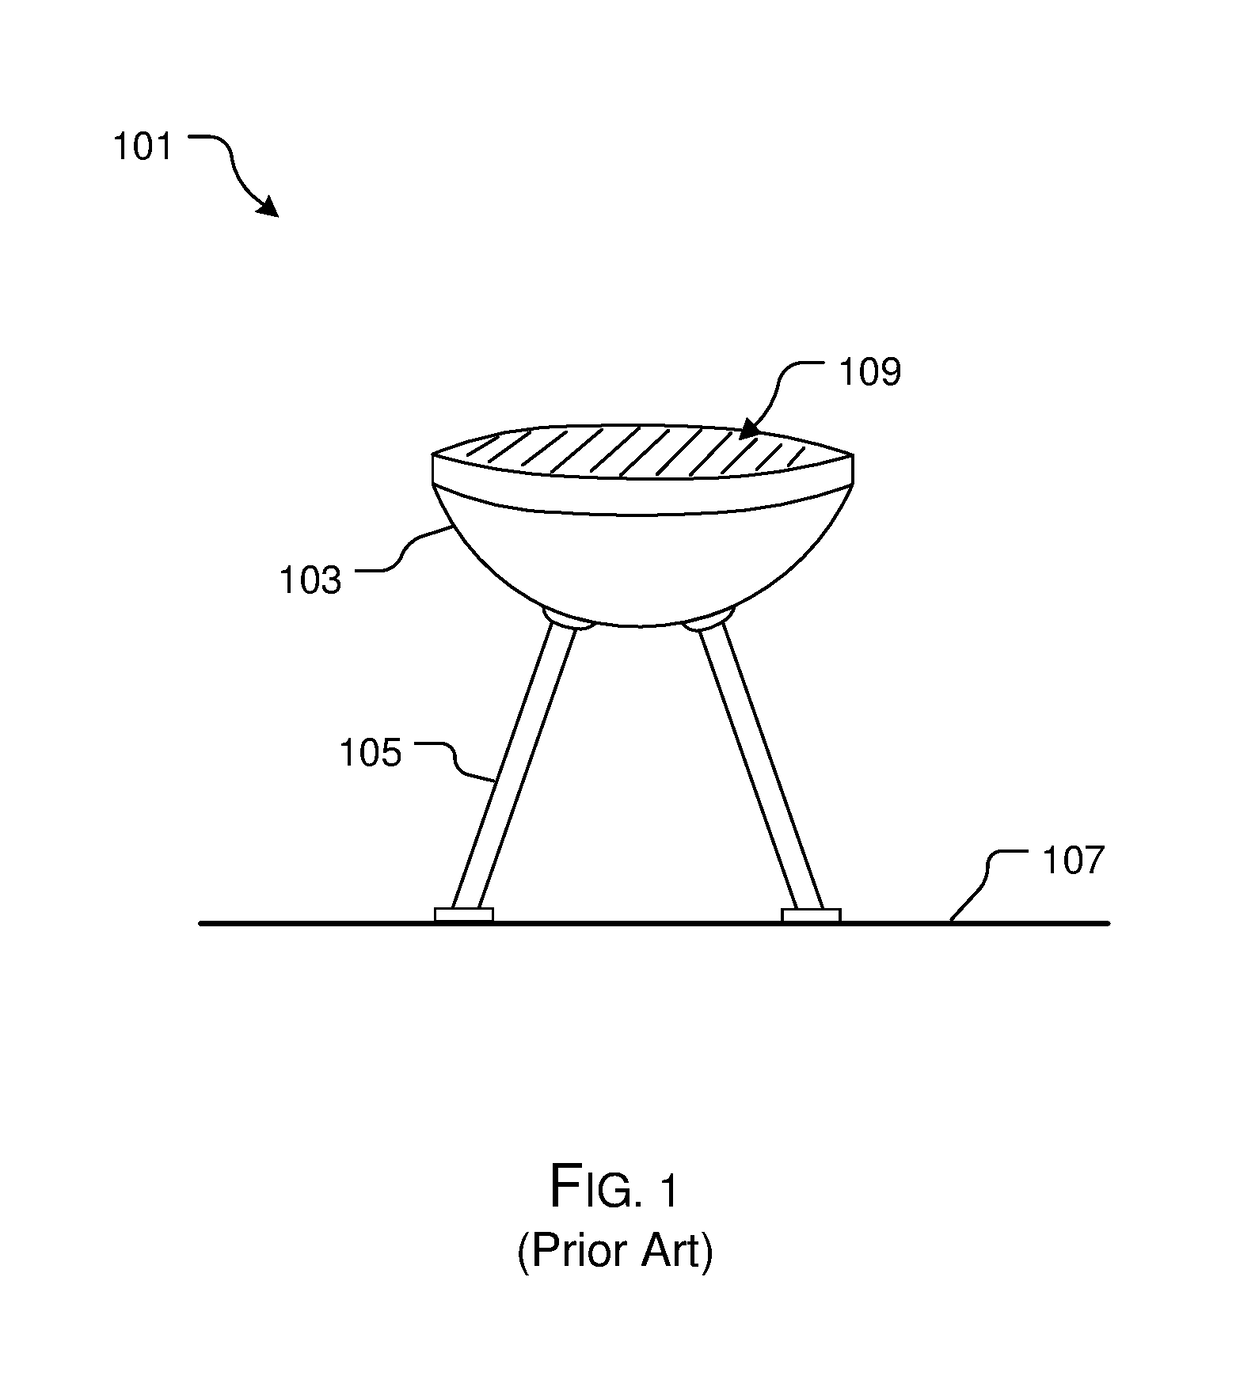 Barbeque smoker system and method of use